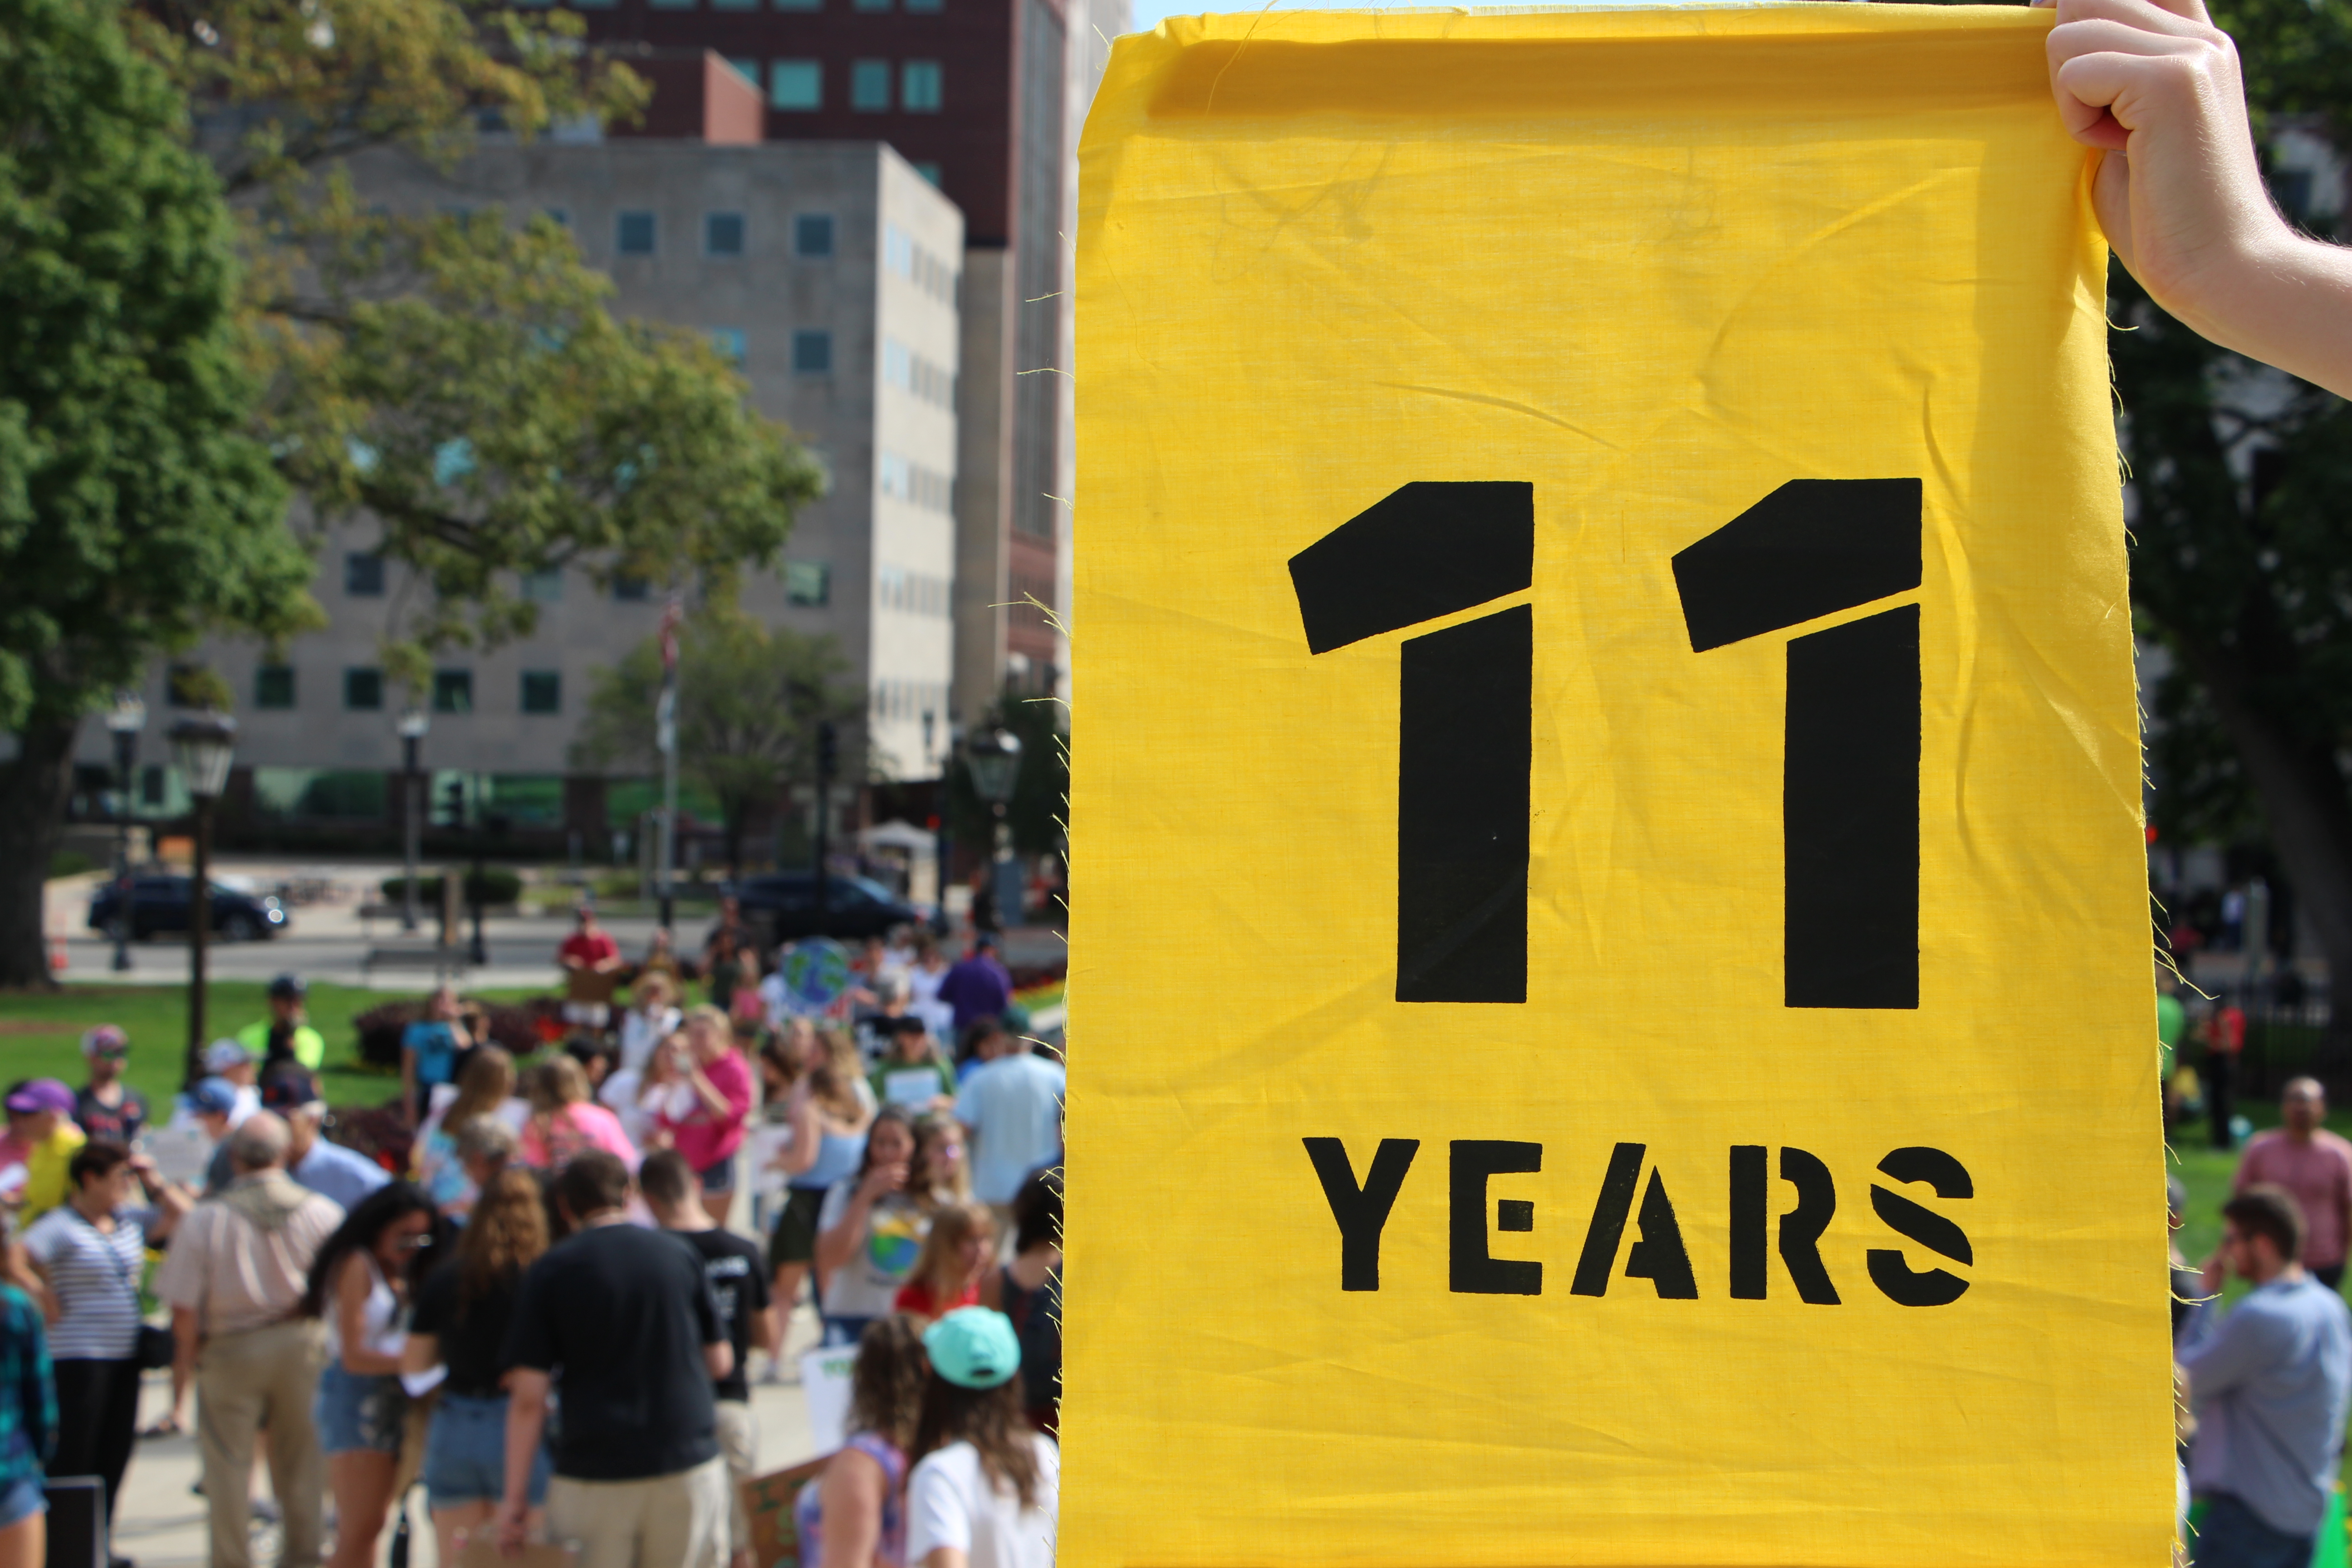 Image shows a yellow sign held out in front of a crowd which reads "11 years"